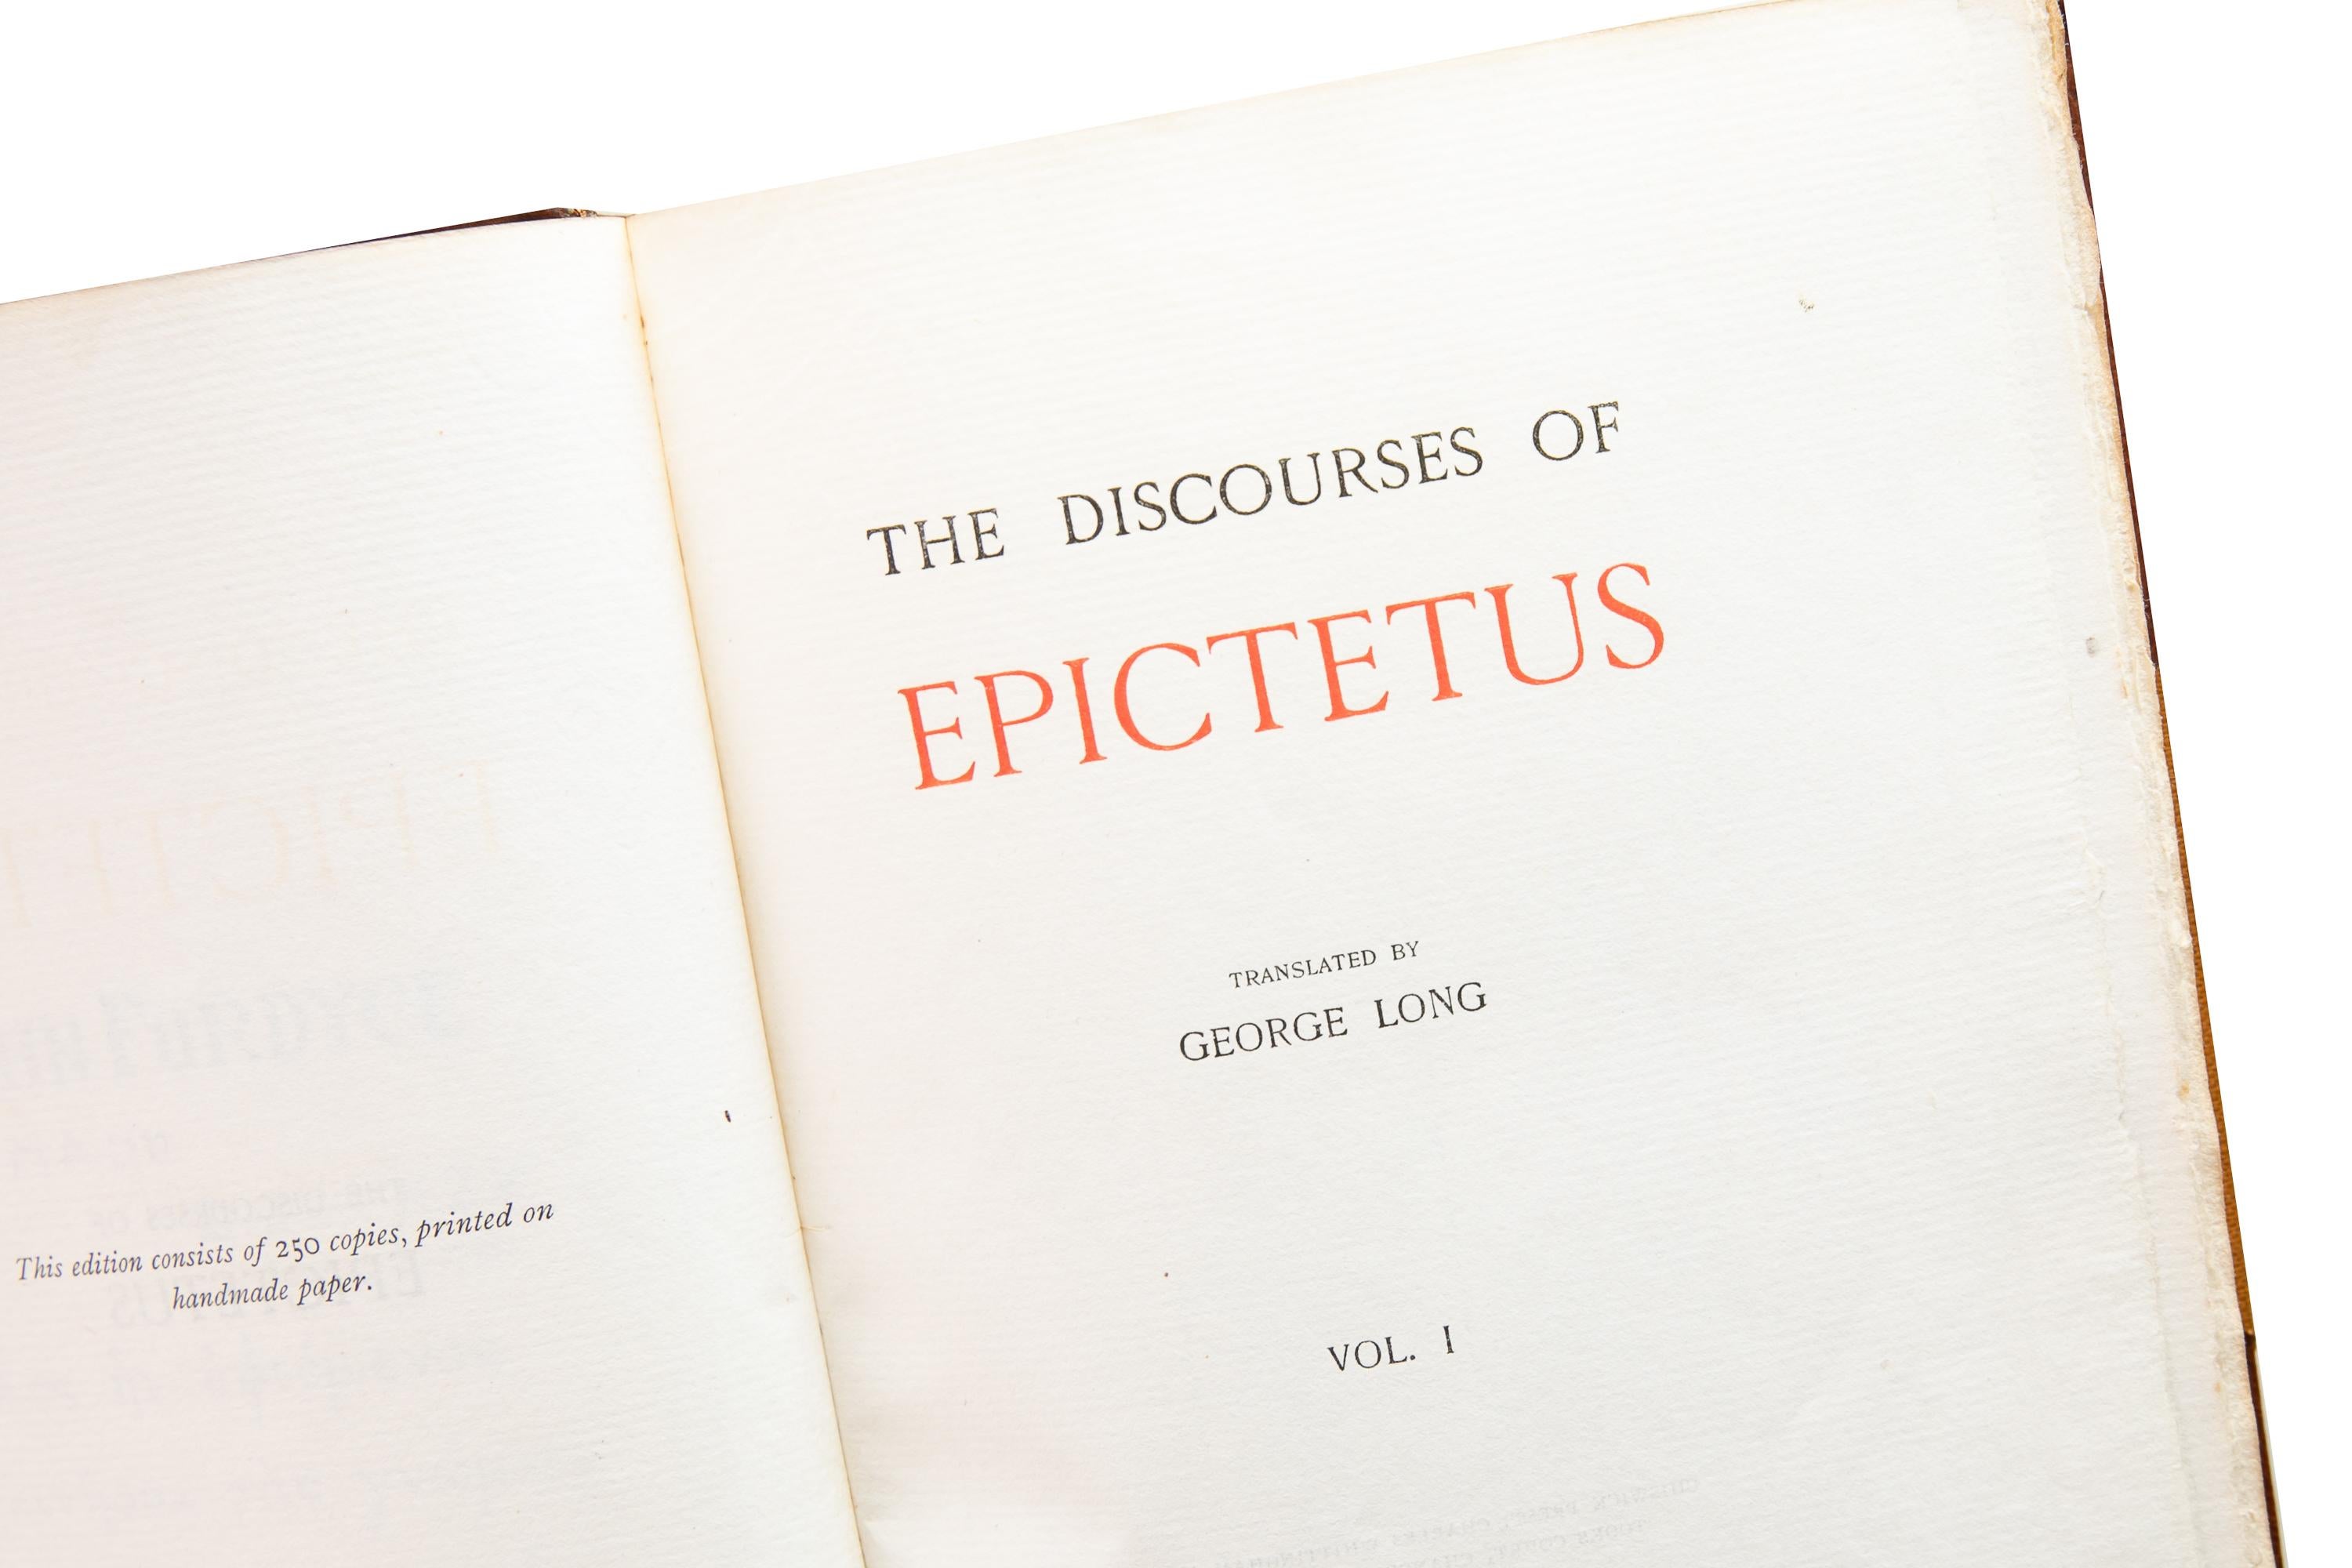 English 2 Volumes. George Long, The Discourses of Epictetus. For Sale